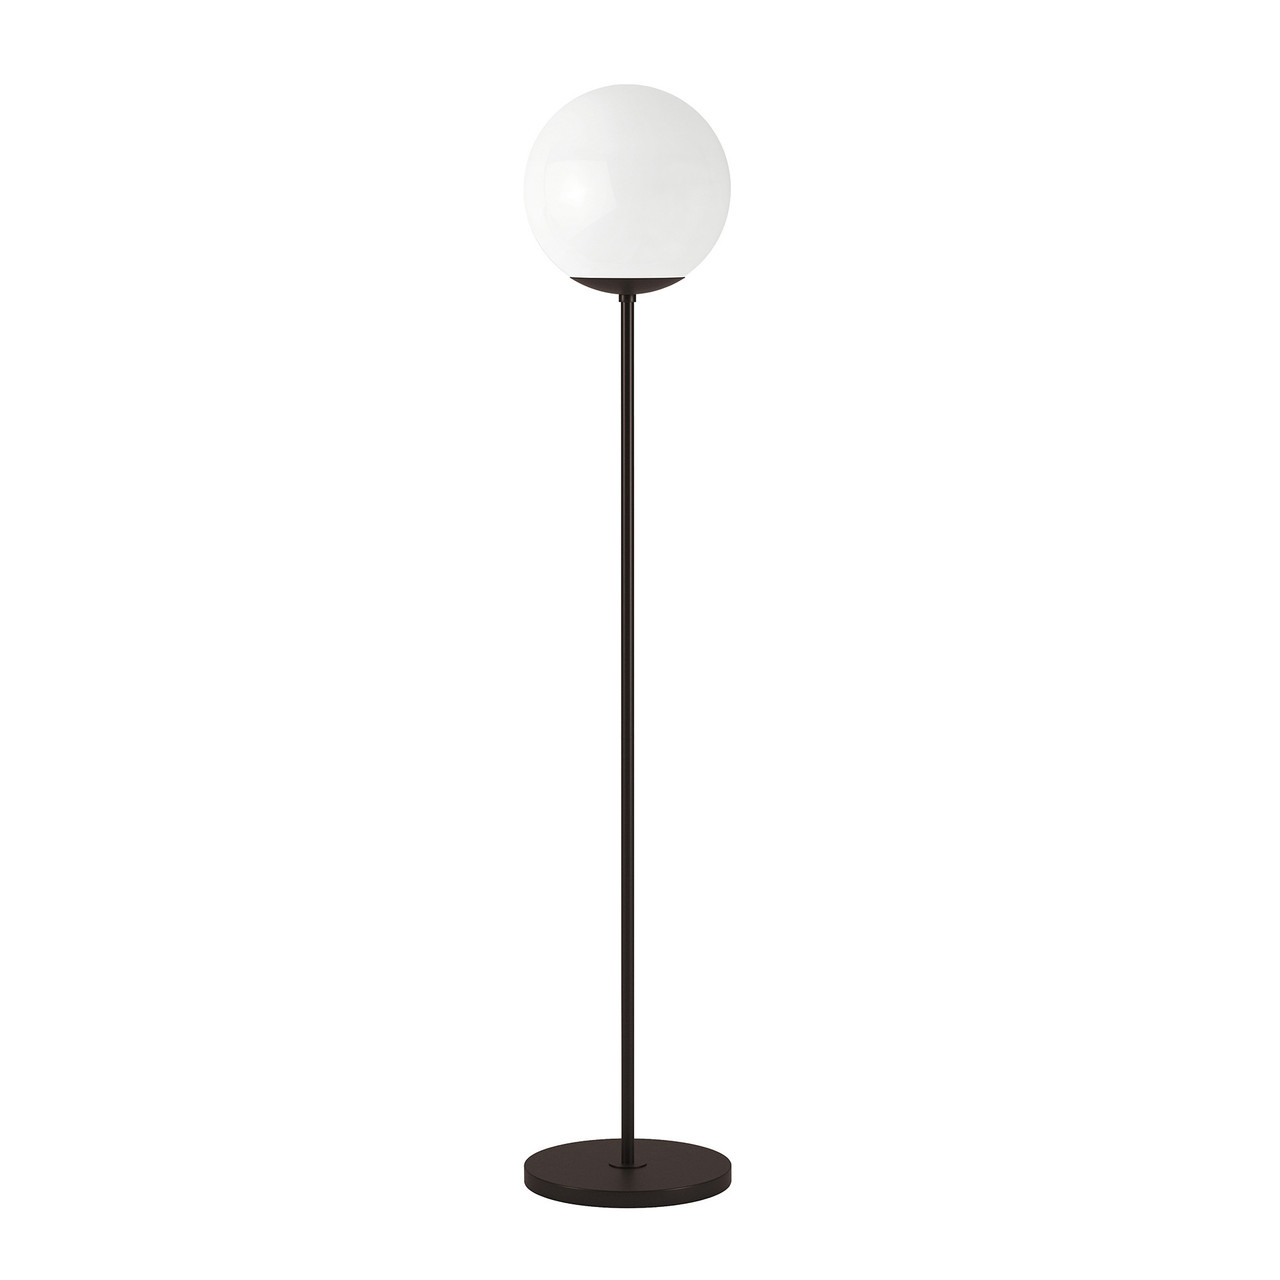 62" Black Novelty Floor Lamp With White Frosted Glass Globe Shade - Chicken Pieces